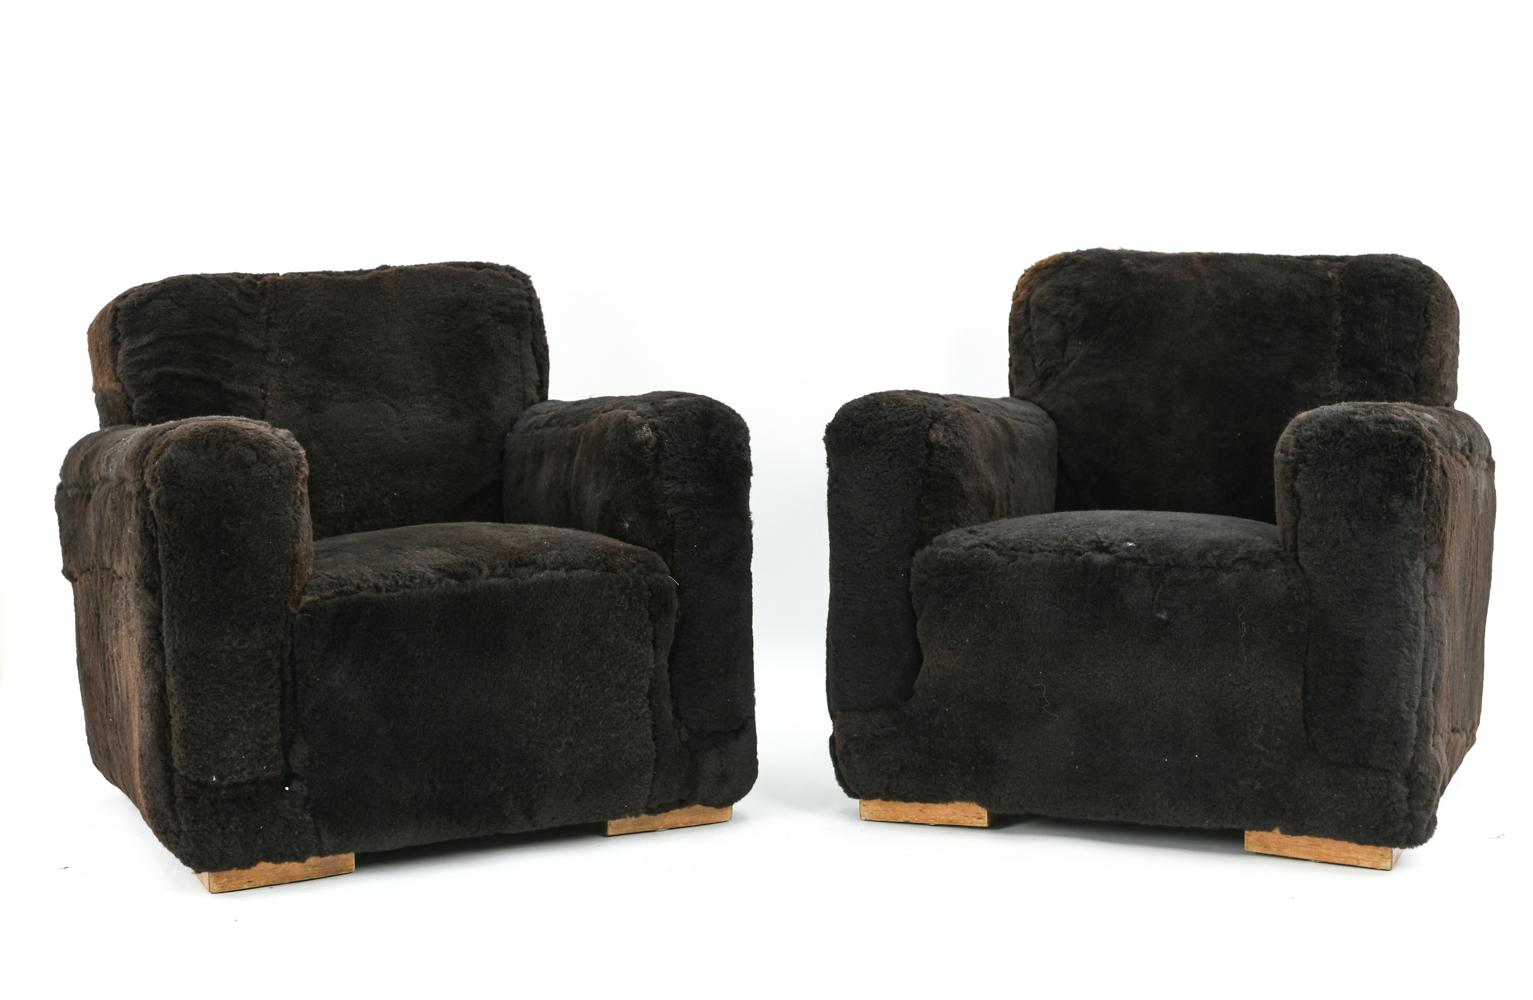 This incredible pair of French Art Deco club chairs has been upholstered in brown lambswool. These luxurious chairs will be the eye-catching statement piece of any interior - fabulous and cozy.